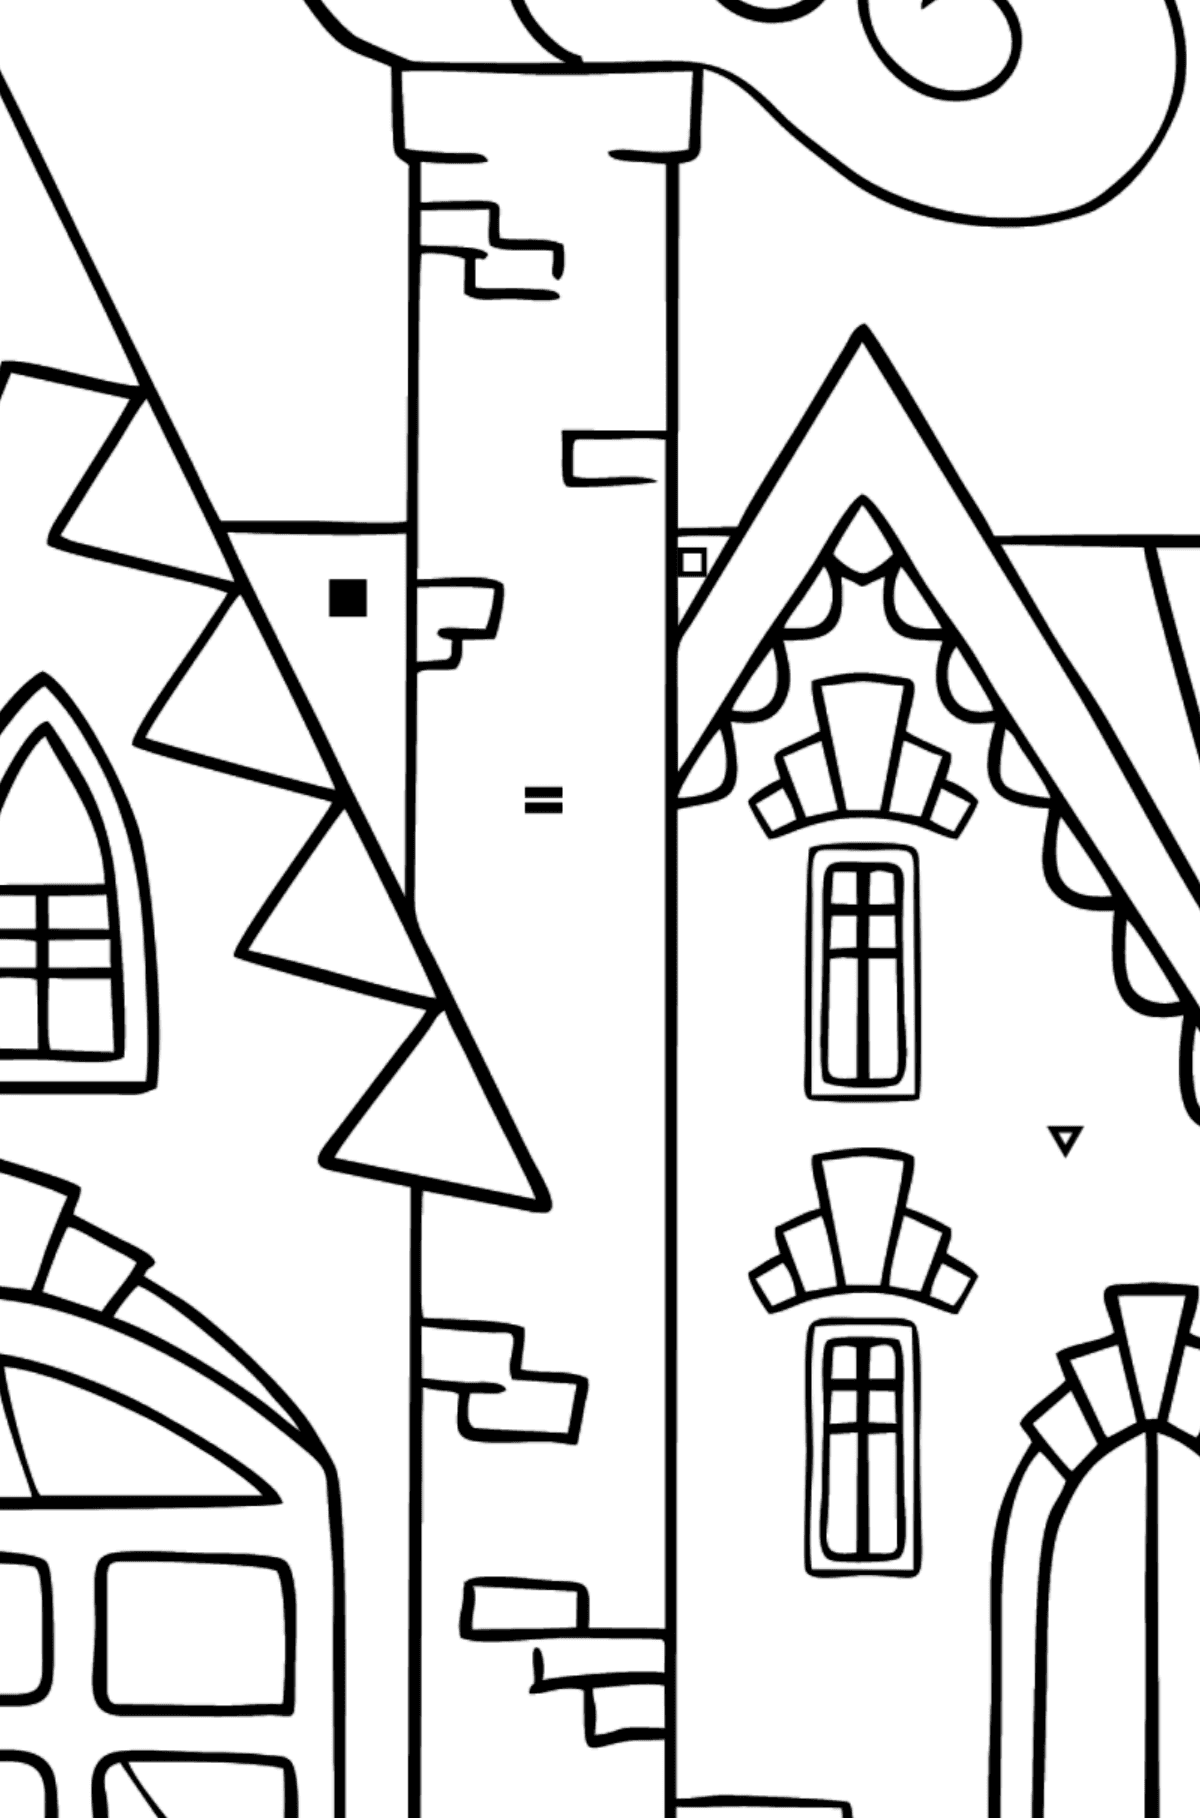 Simple Coloring Page - A Charming House - Coloring by Symbols for Kids